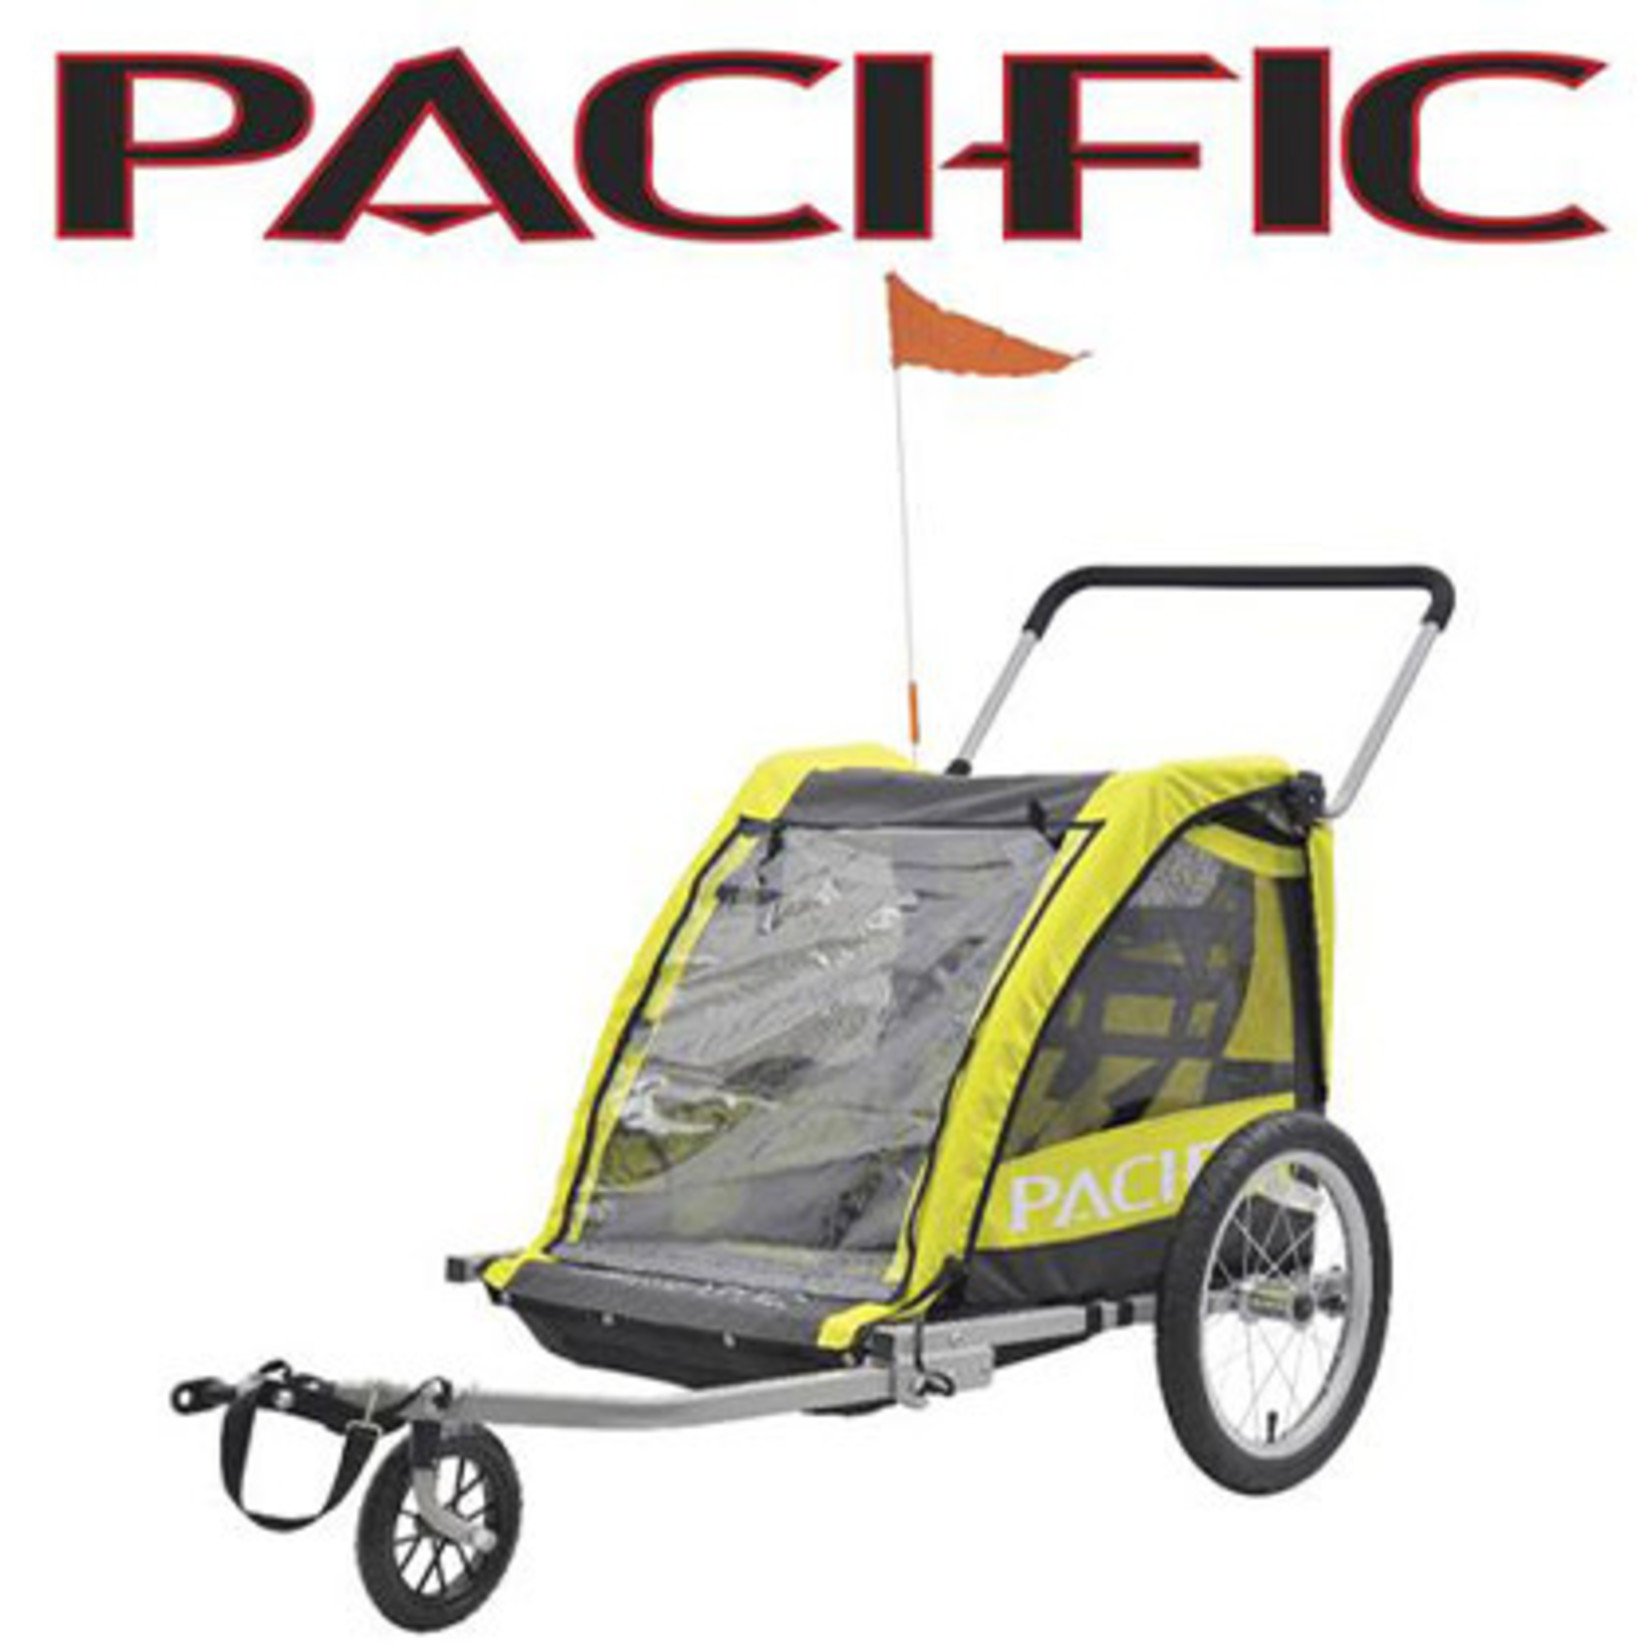 PACIFIC TRAILER DOUBLE 2 IN 1 DUALLY